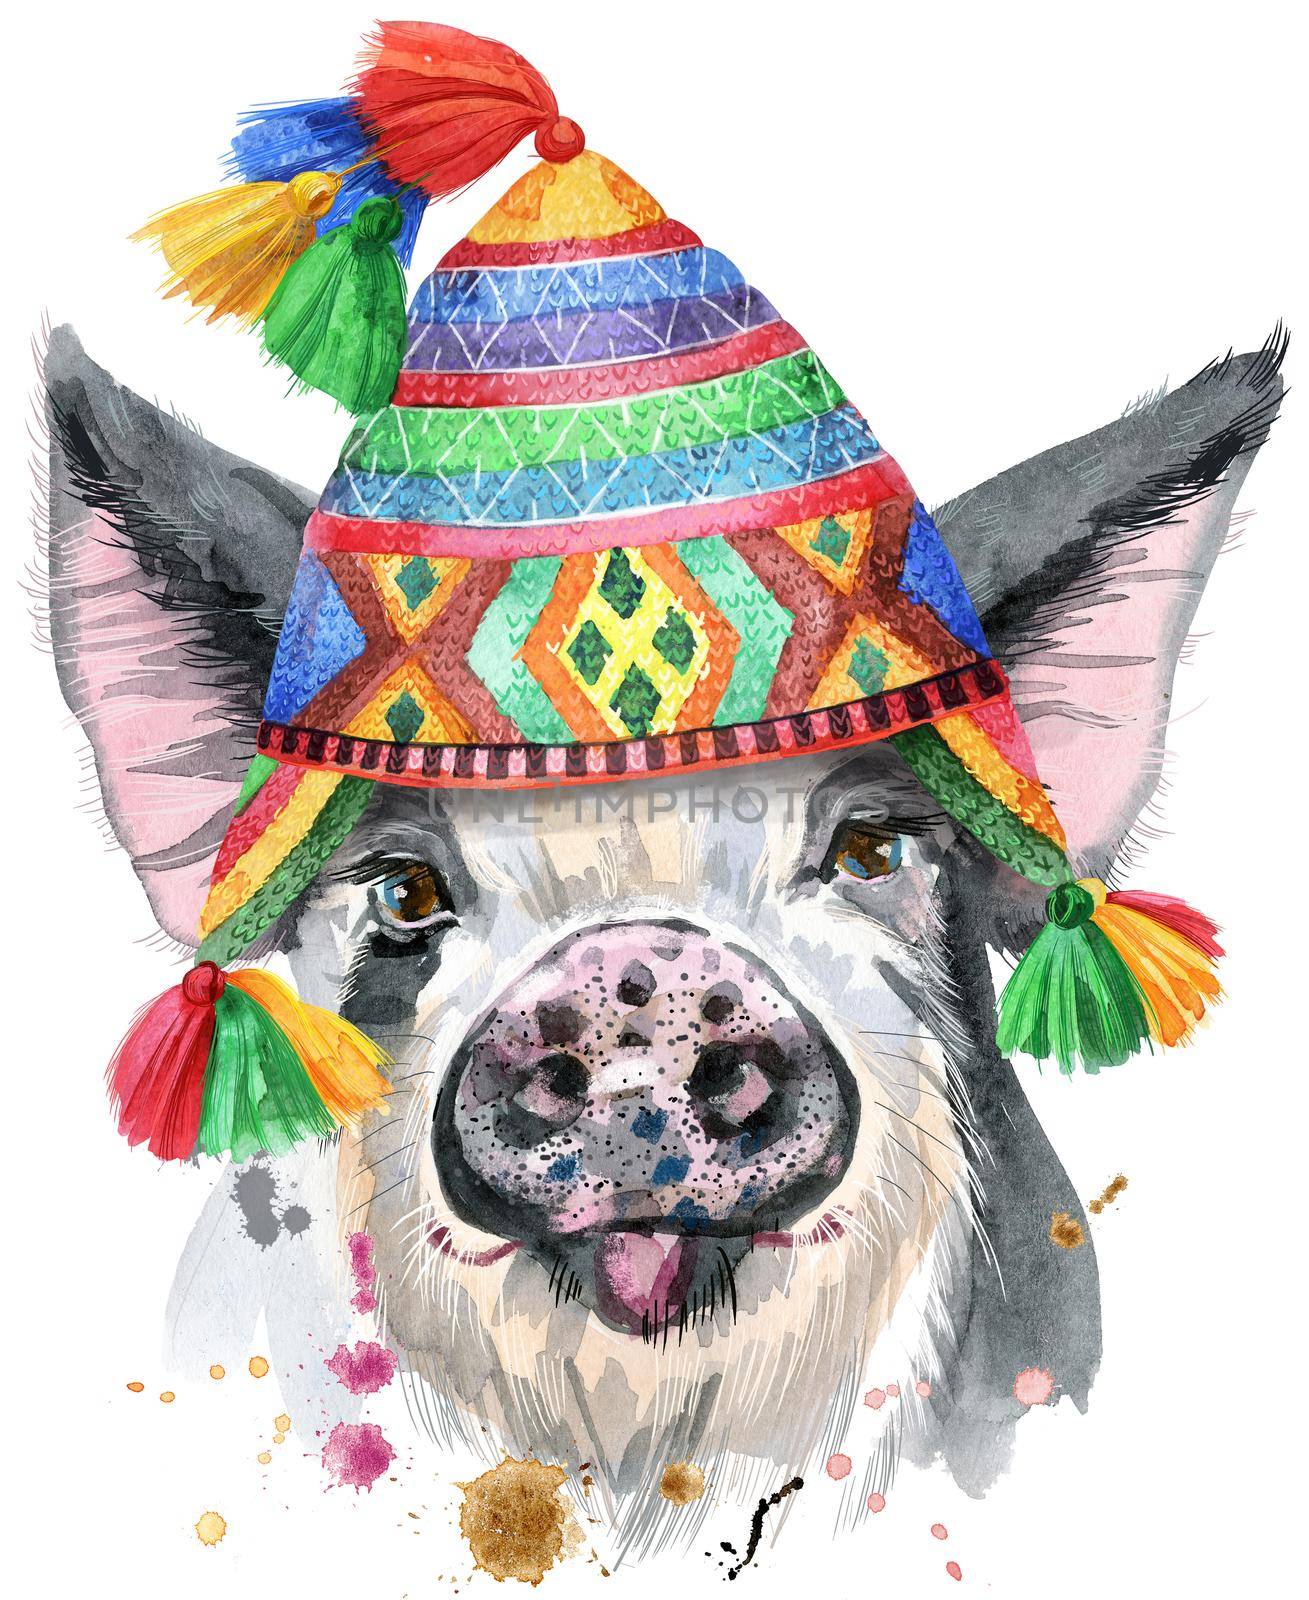 Cute piggy in chullo hat. Pig for T-shirt graphics. Watercolor pig in black spots illustration